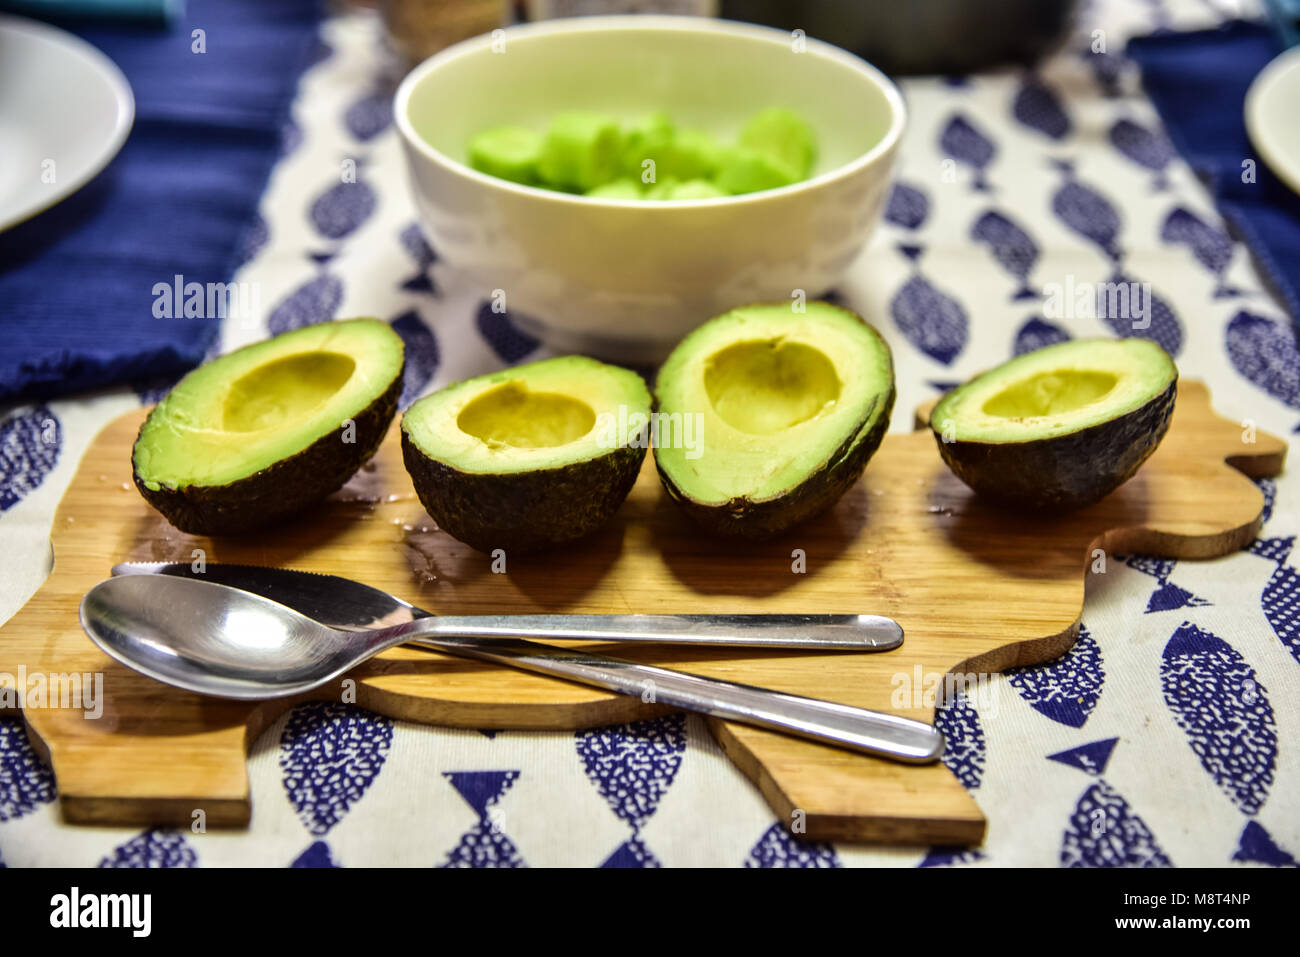 https://c8.alamy.com/comp/M8T4NP/4-halved-avocados-sit-on-a-cute-cow-shaped-wooden-cutting-board-a-M8T4NP.jpg